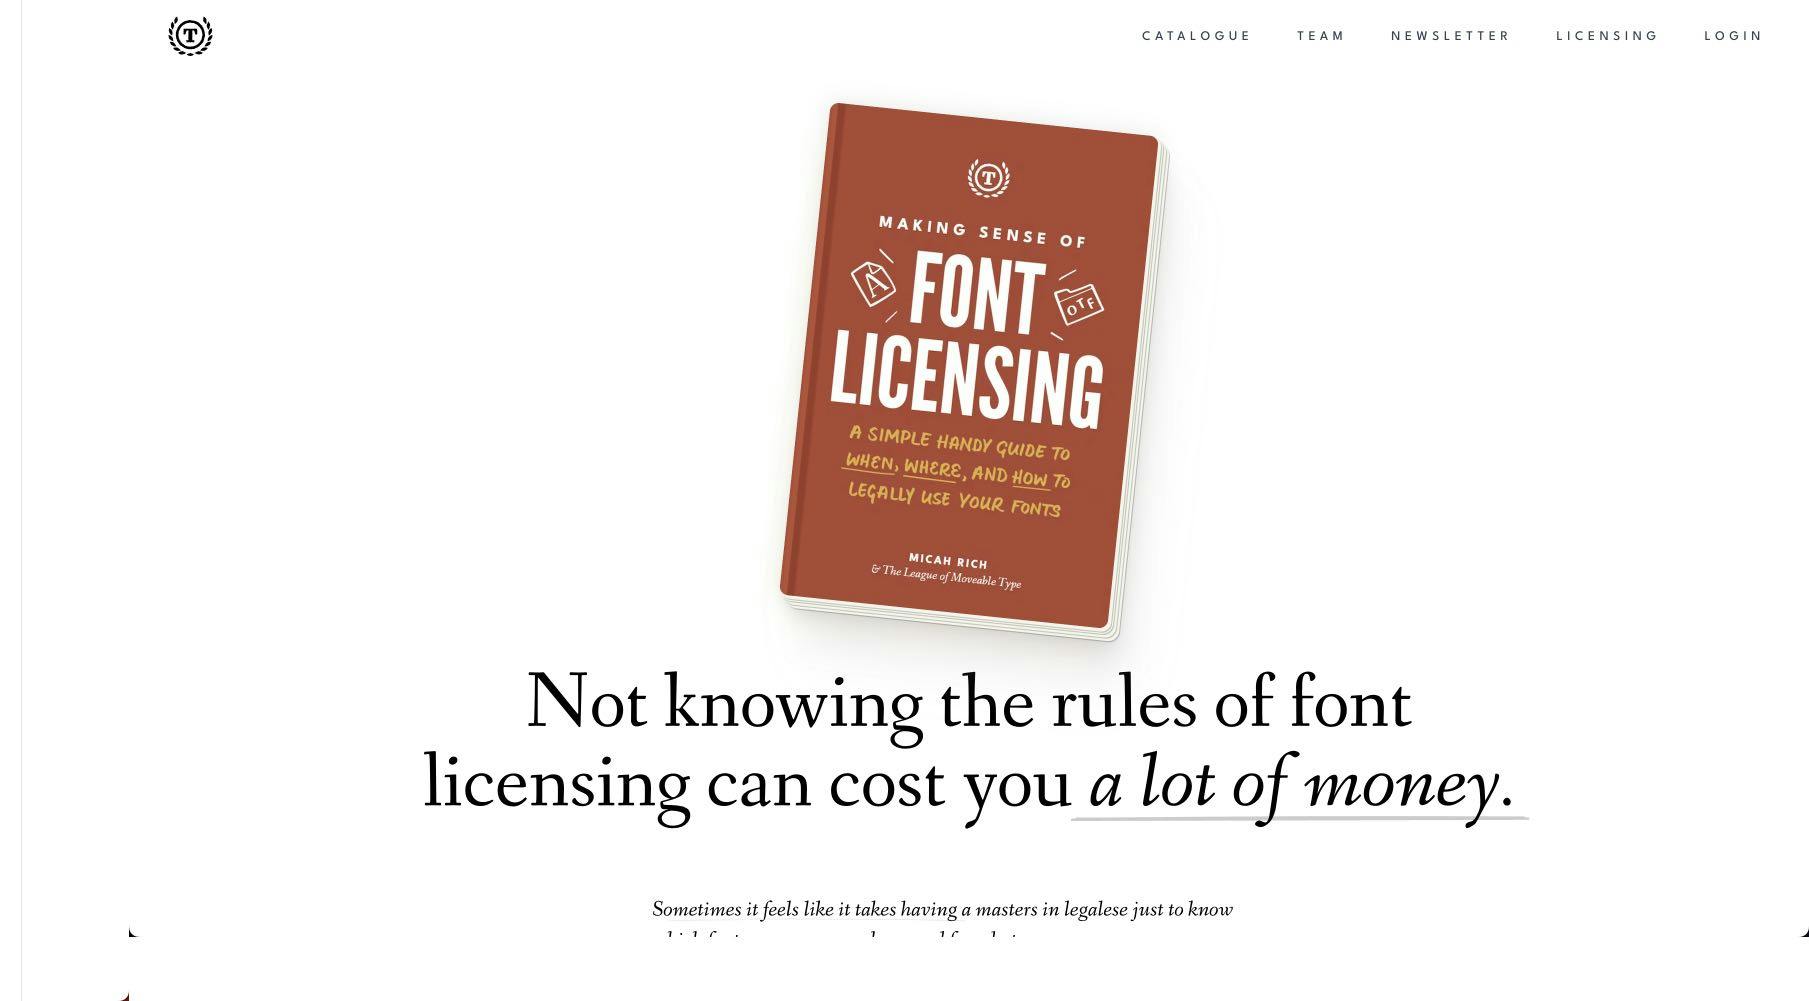 Wrote, designed, and published a book on all the ins-and-outs of font licensing.